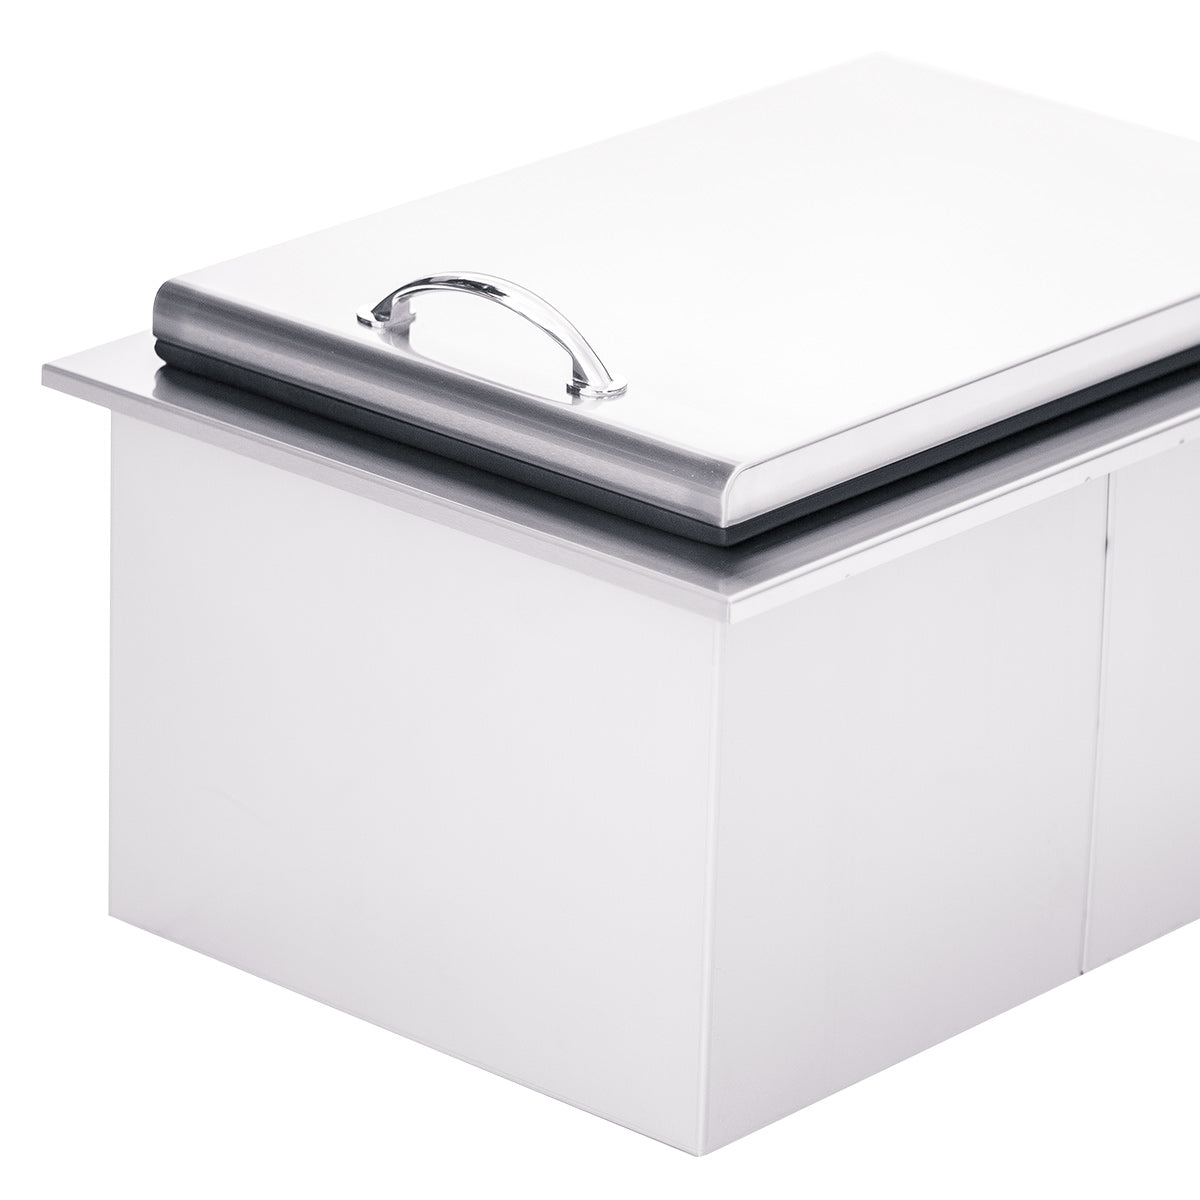 Sunstone Grills Drop-In Ice Chest, Silver